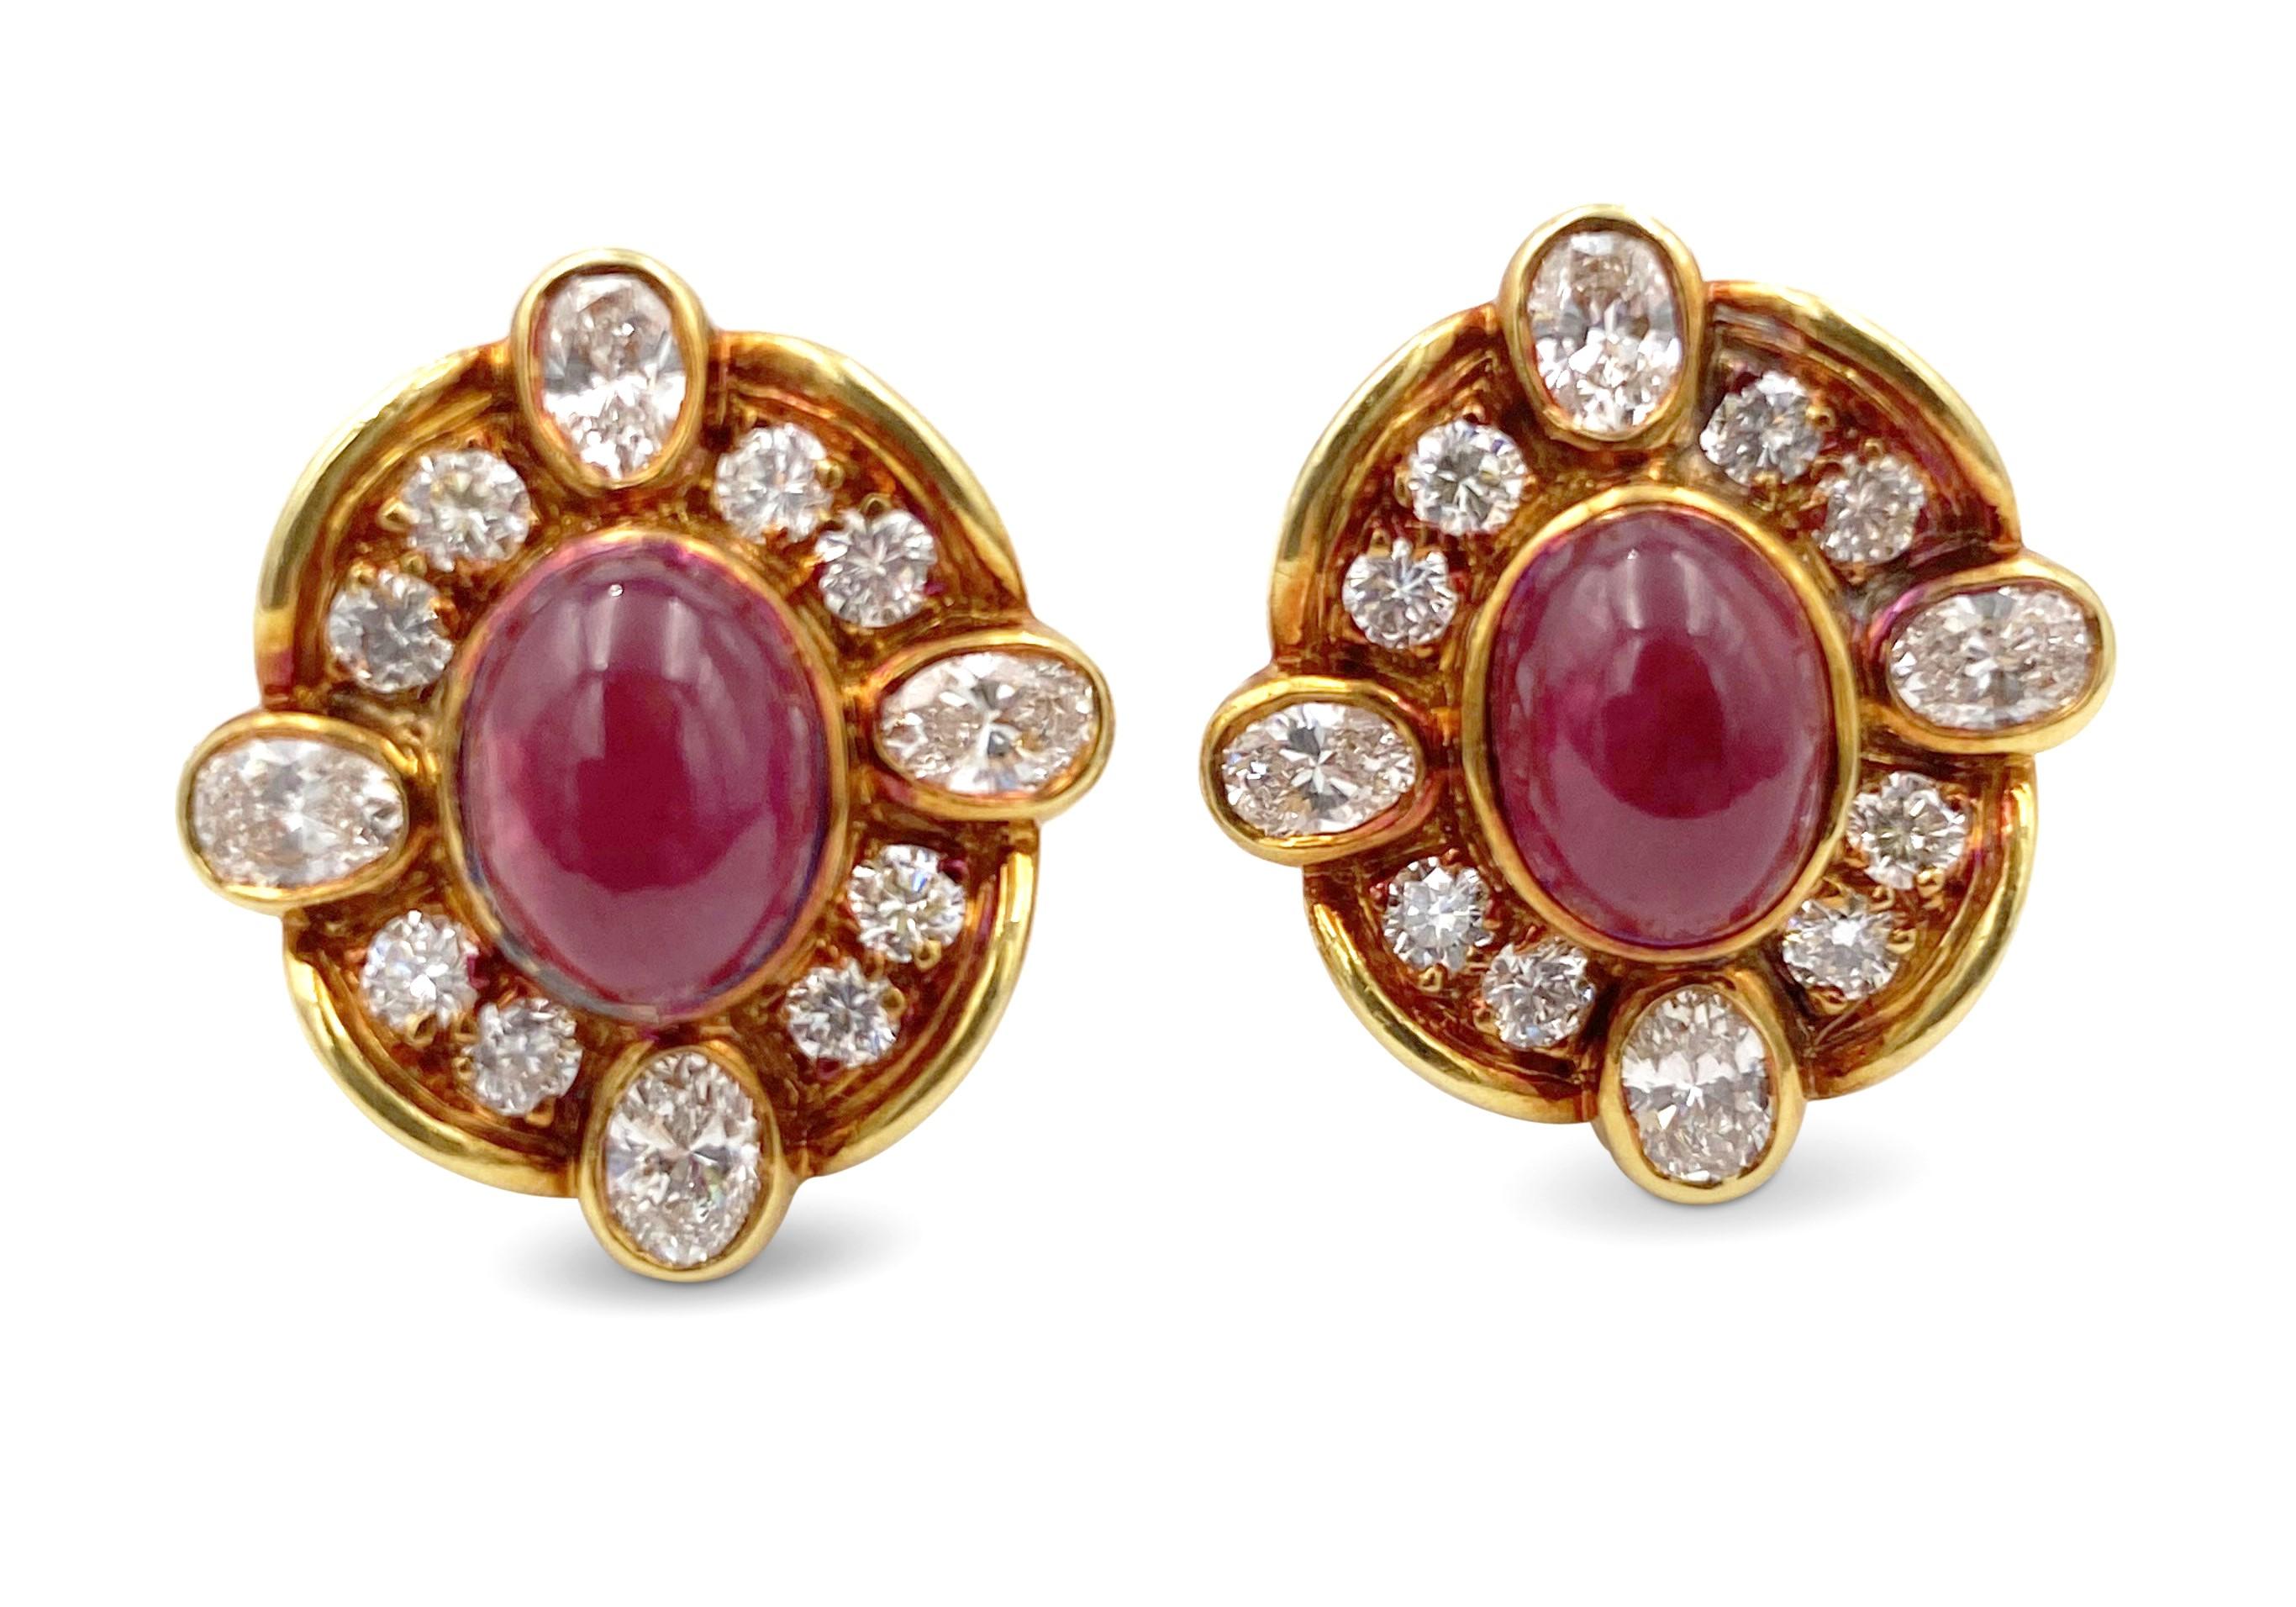 Vintage Van Cleef & Arpels diamond and ruby ear clips made in 18 karat yellow gold. The earrings center on cabochon ruby stones weighing an approximate 6.40 carat total surrounded by oval and round brilliant cut diamonds (F-G in color, VS clarity)